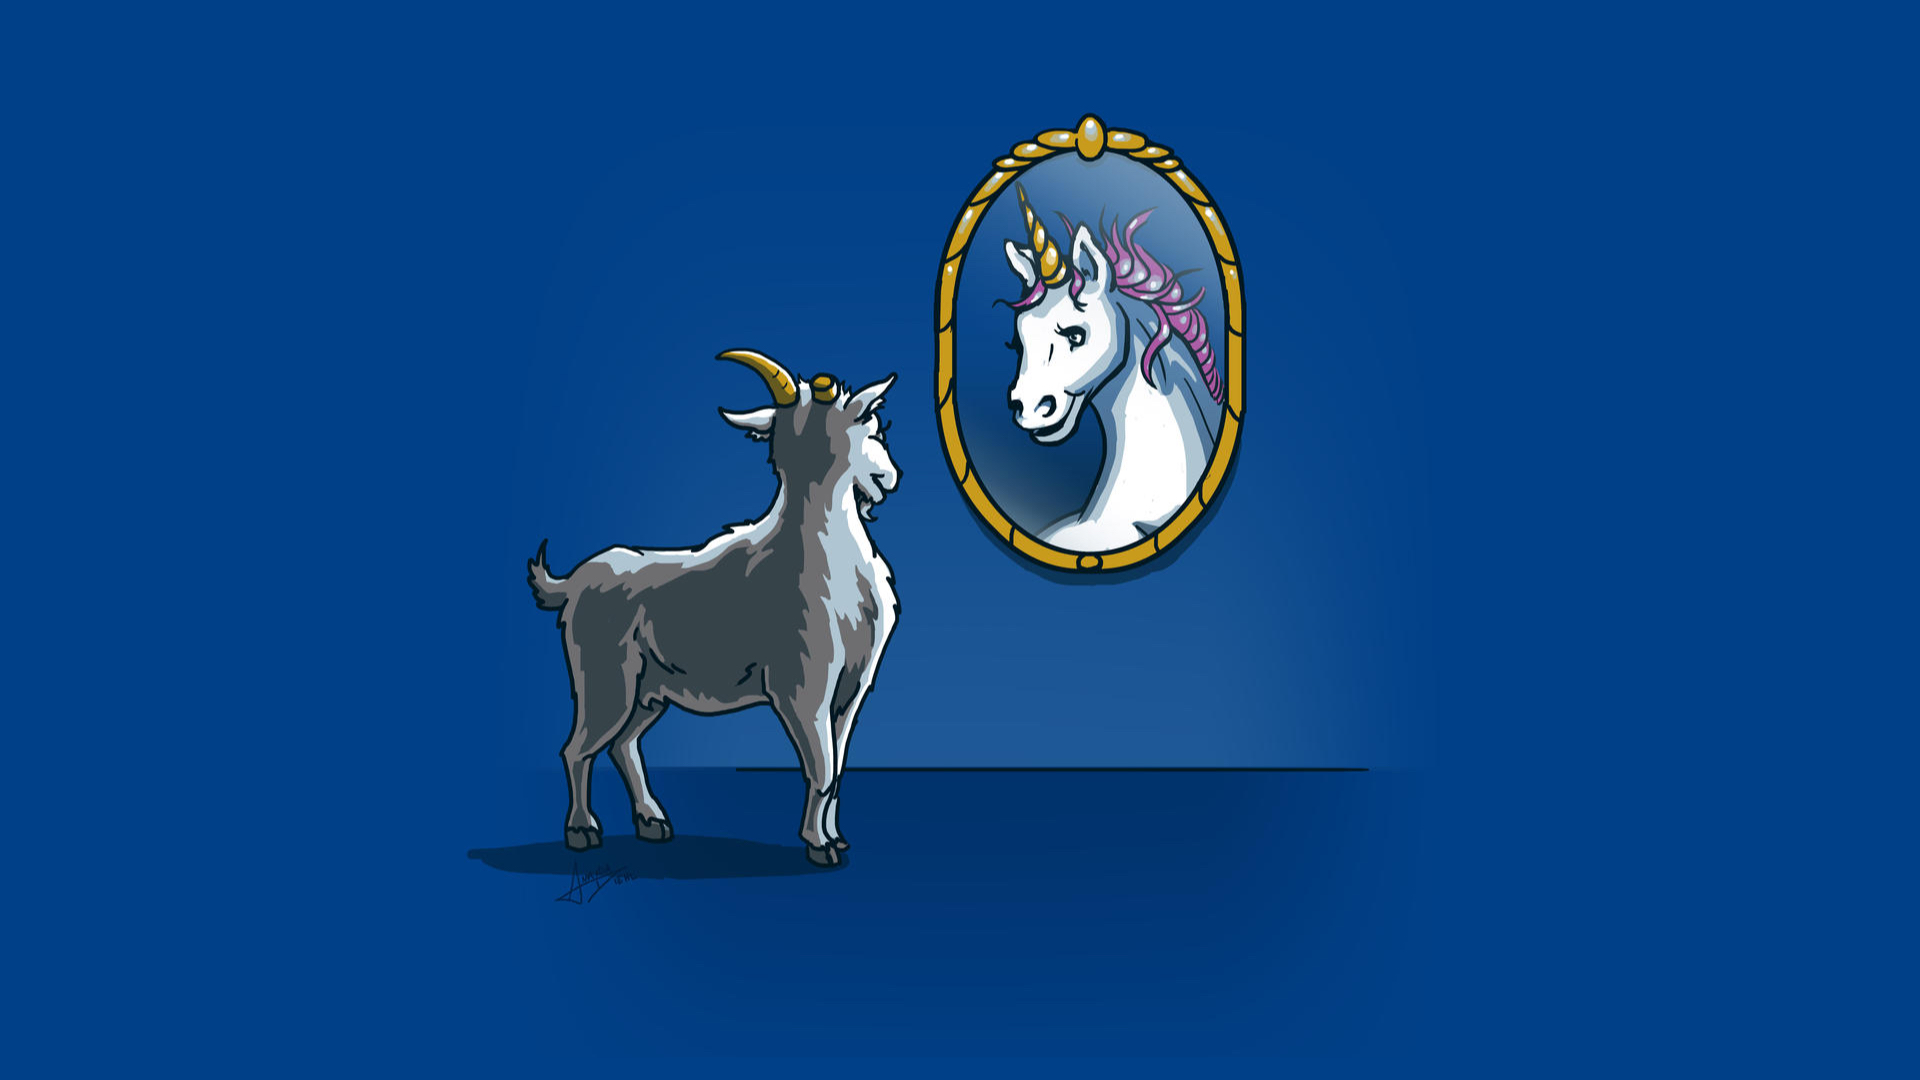 Image of Goat Looking in a Mirror but seeing a Unicorn